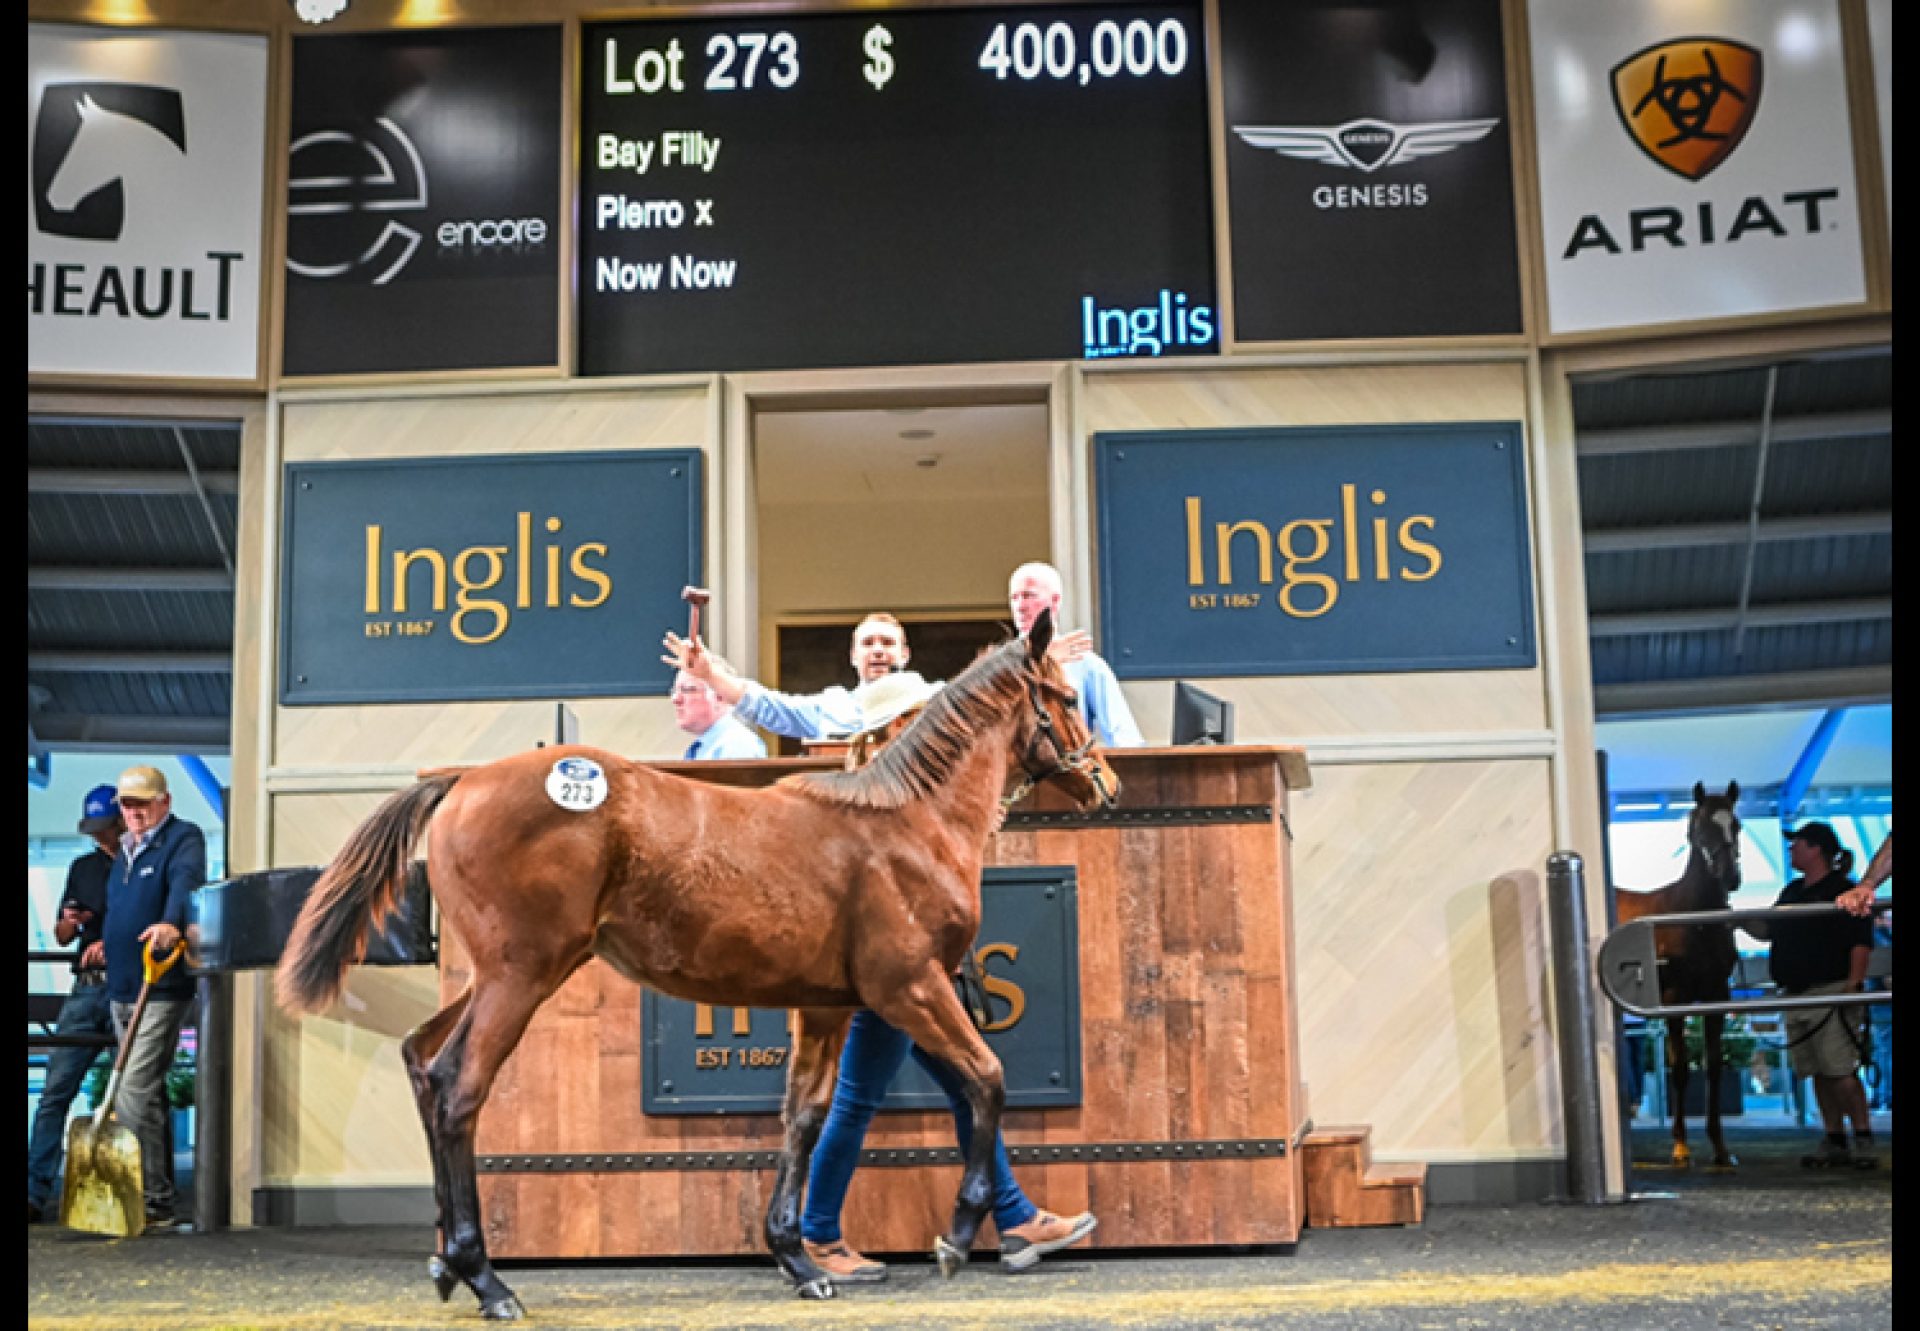 Pierro X Now Now selling for $400,000 at Inglis Weanling Sale